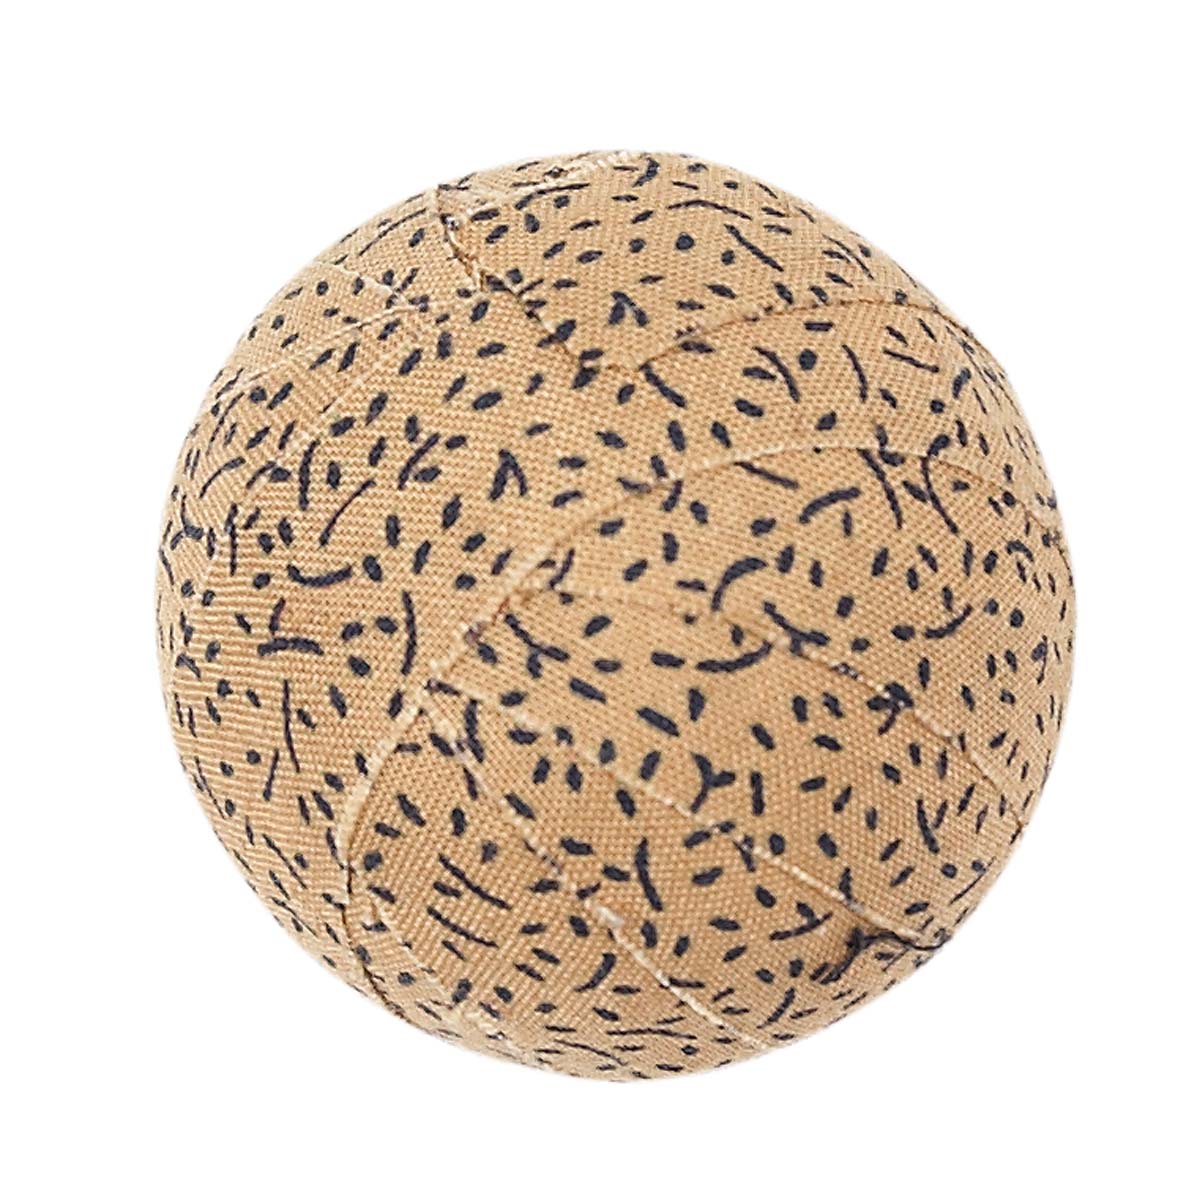 Millsboro 1.5 inch Fabric Ball (Set of 6) - The Weed Patch